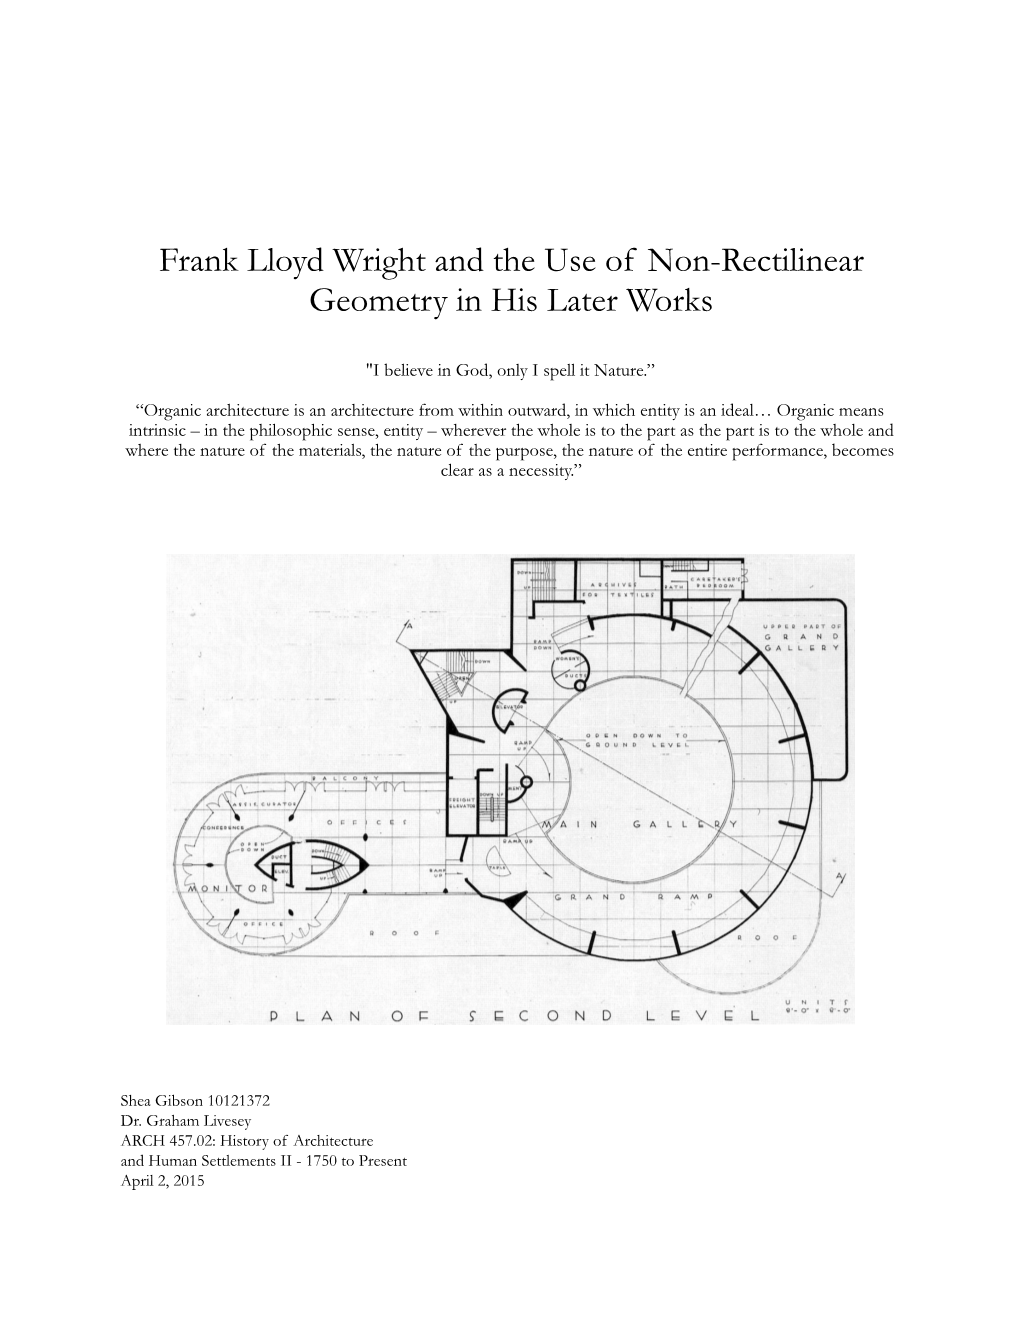 Frank Lloyd Wright and the Use of Non-Rectilinear Geometry in His Later Works